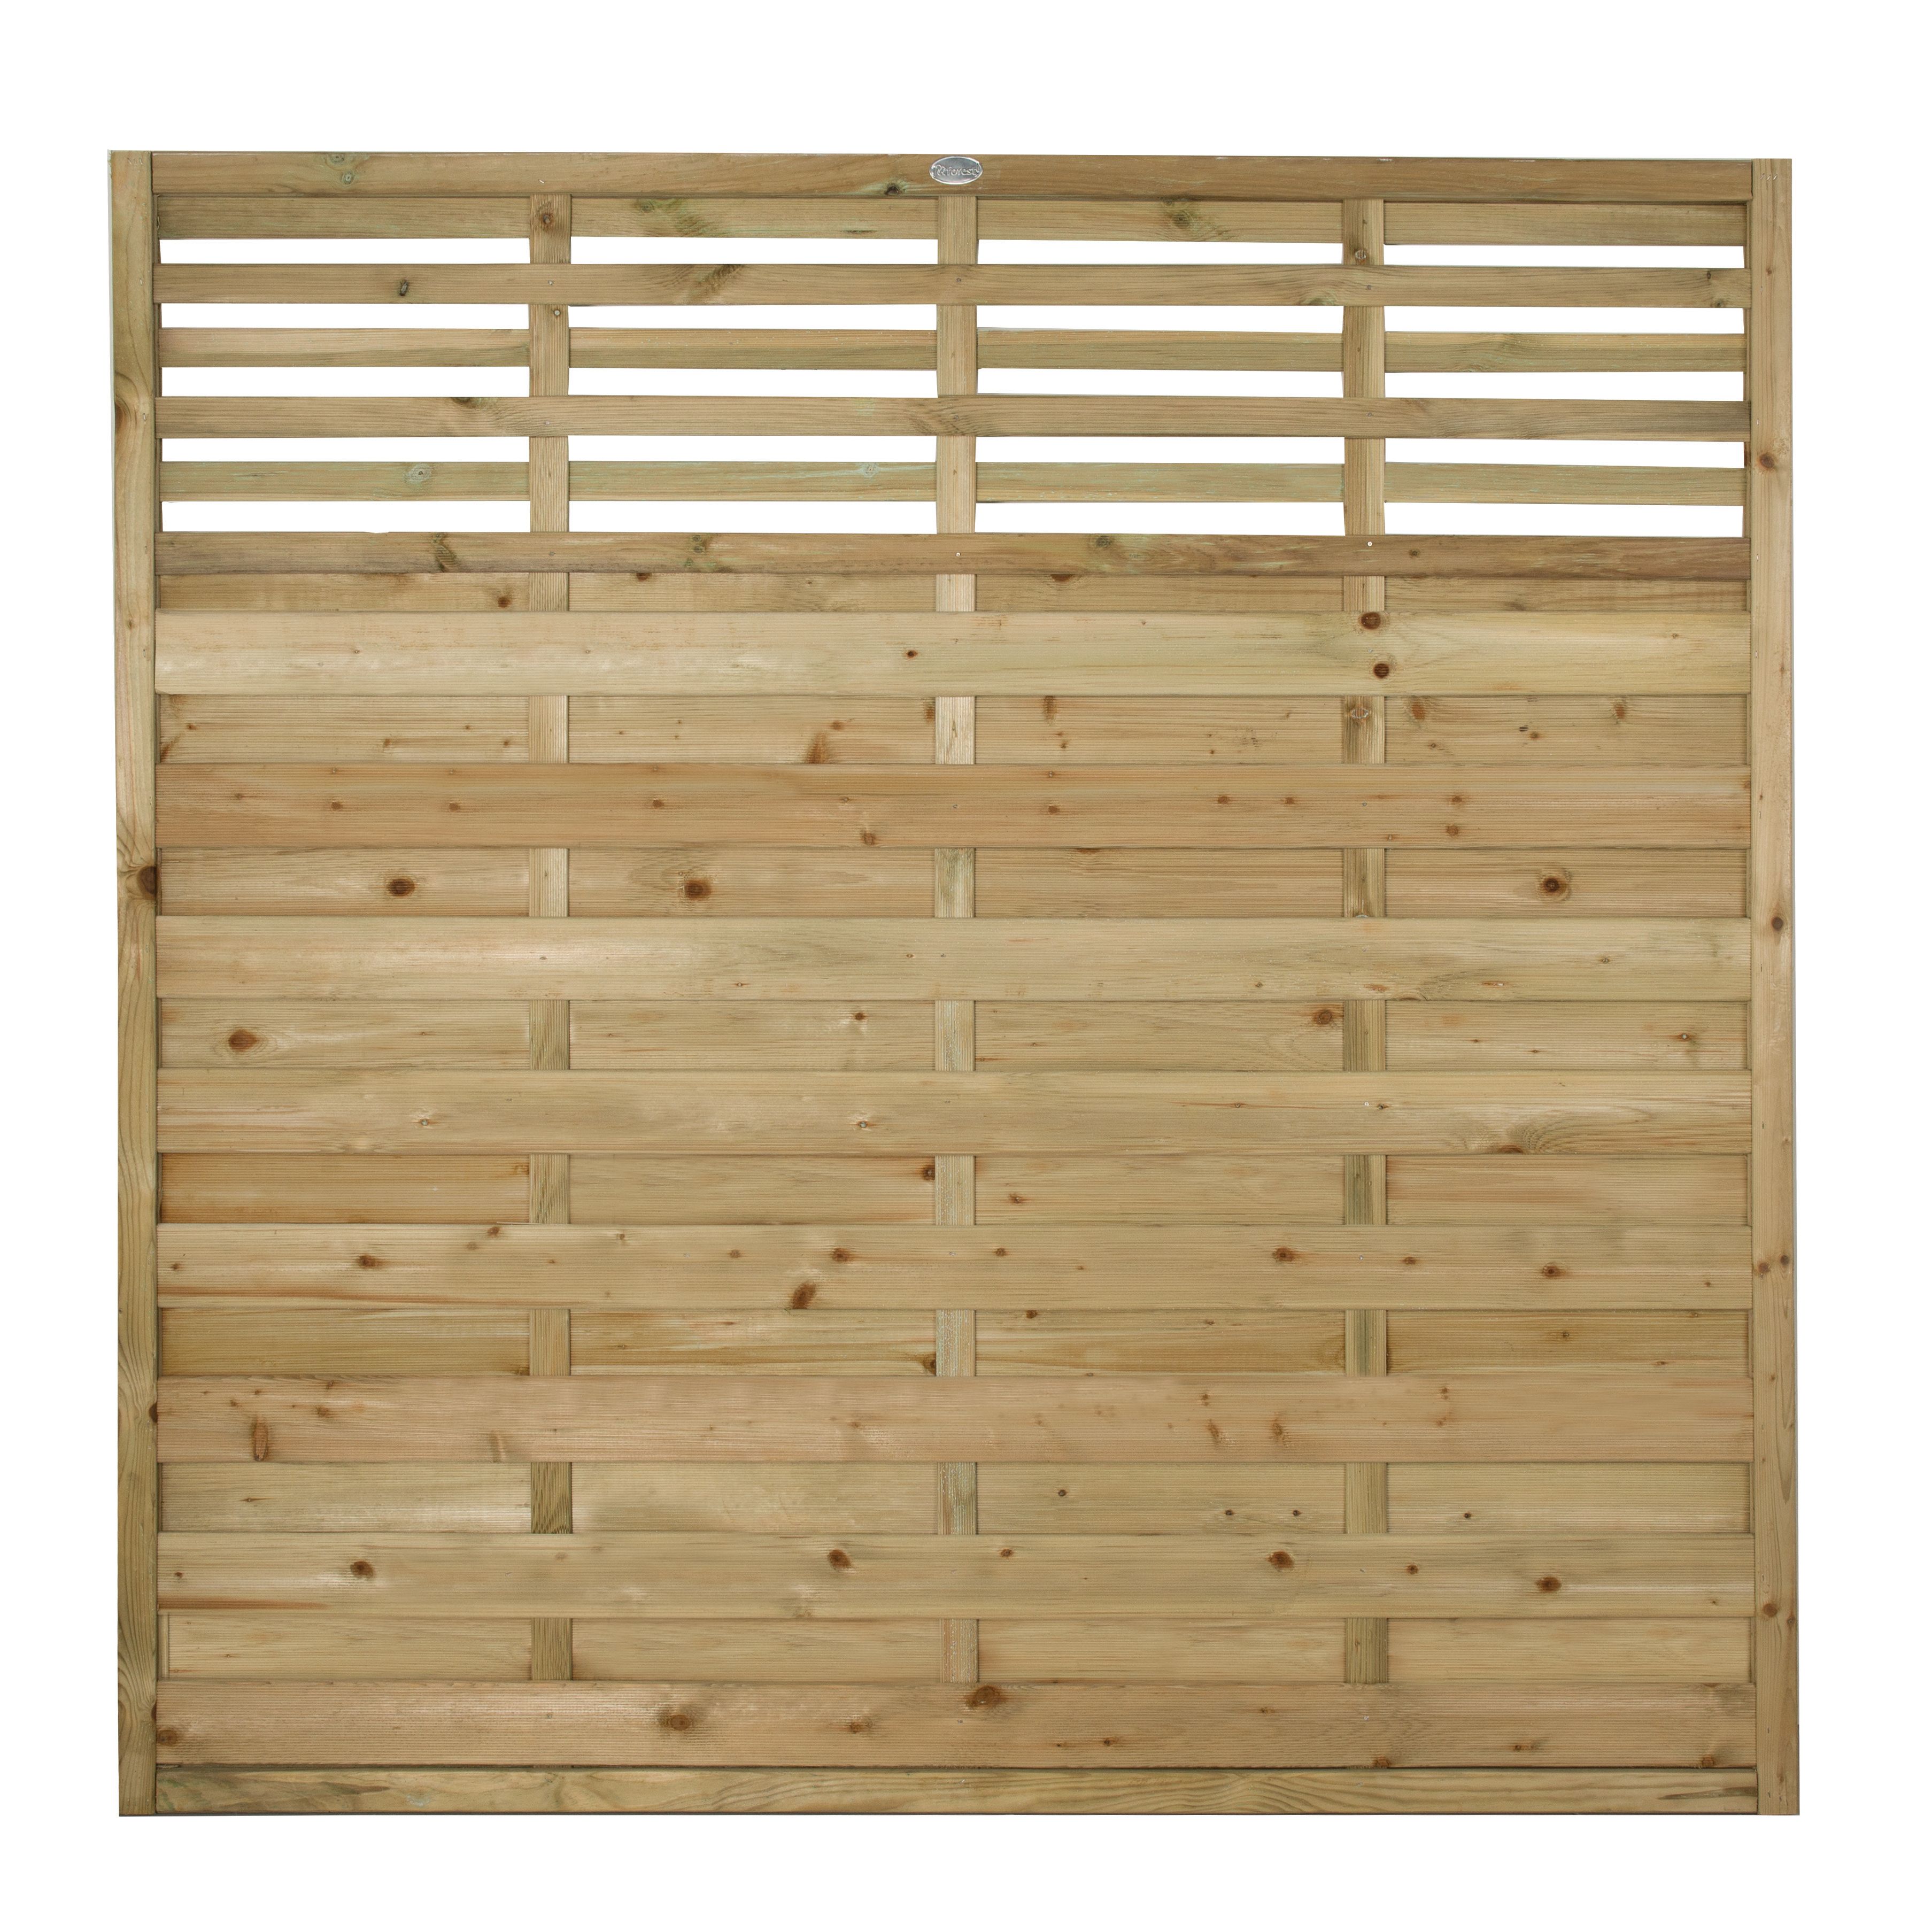 Image of Forest Garden Pressure Treated Kyoto Fence Panel - 1800 x 1800mm - 6 x 6ft - Pack of 3